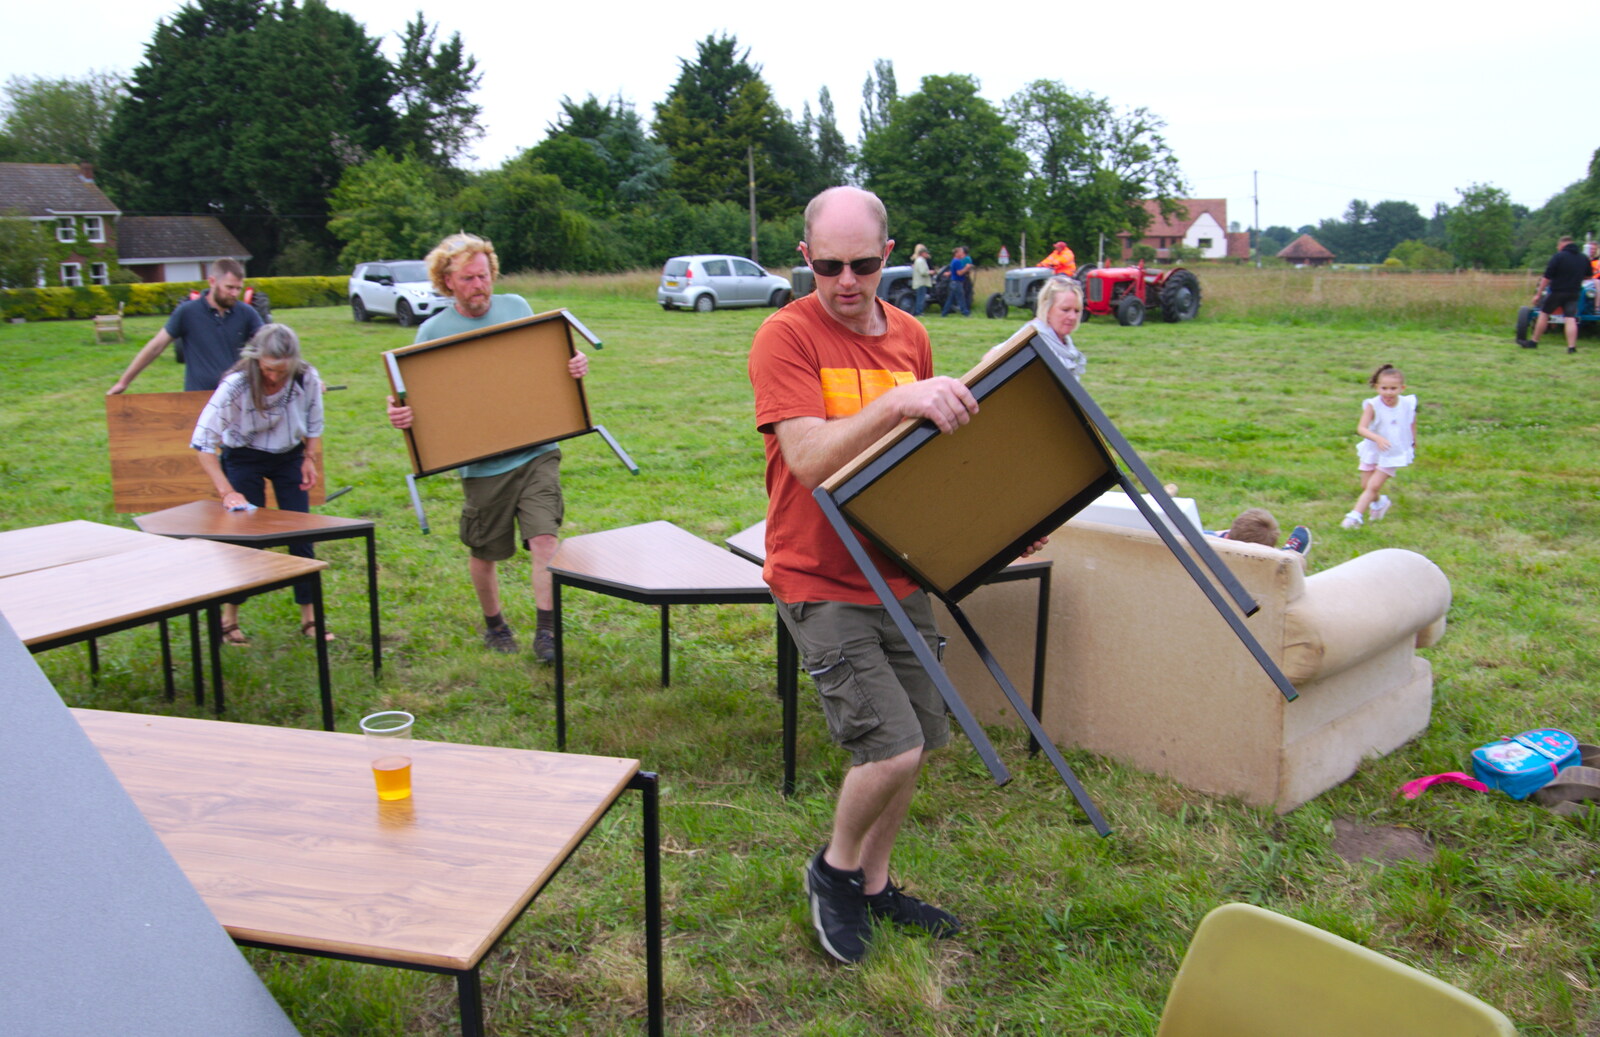 Phil, Wavy and Paul help clear up tables from A Hog Roast on Little Green, Thrandeston, Suffolk - 23rd June 2019